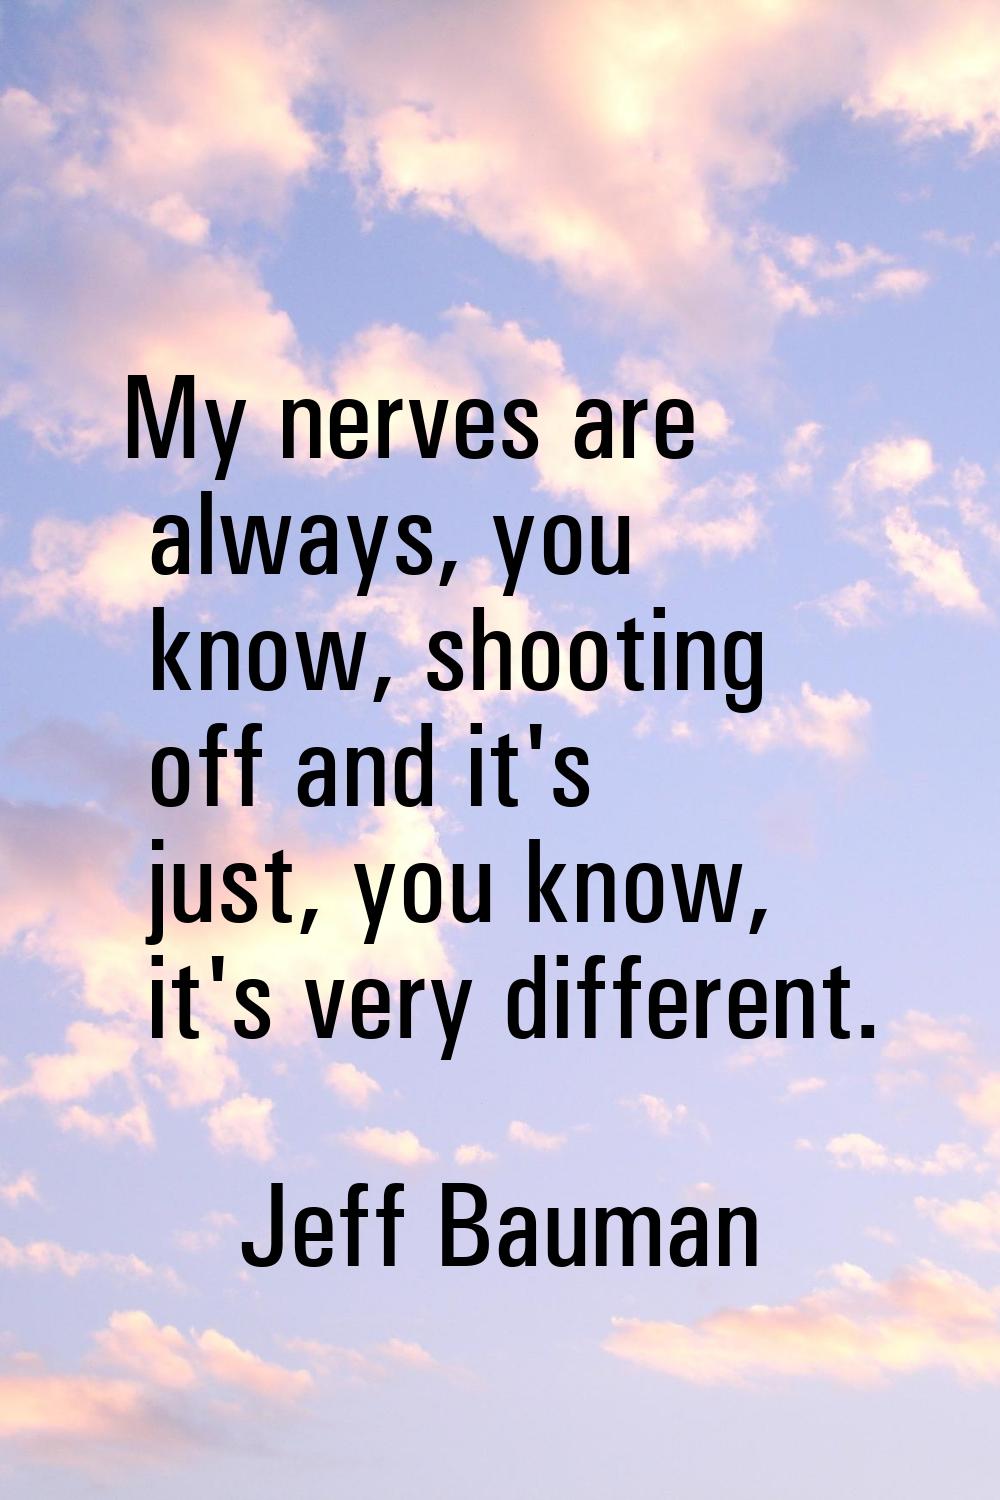 My nerves are always, you know, shooting off and it's just, you know, it's very different.